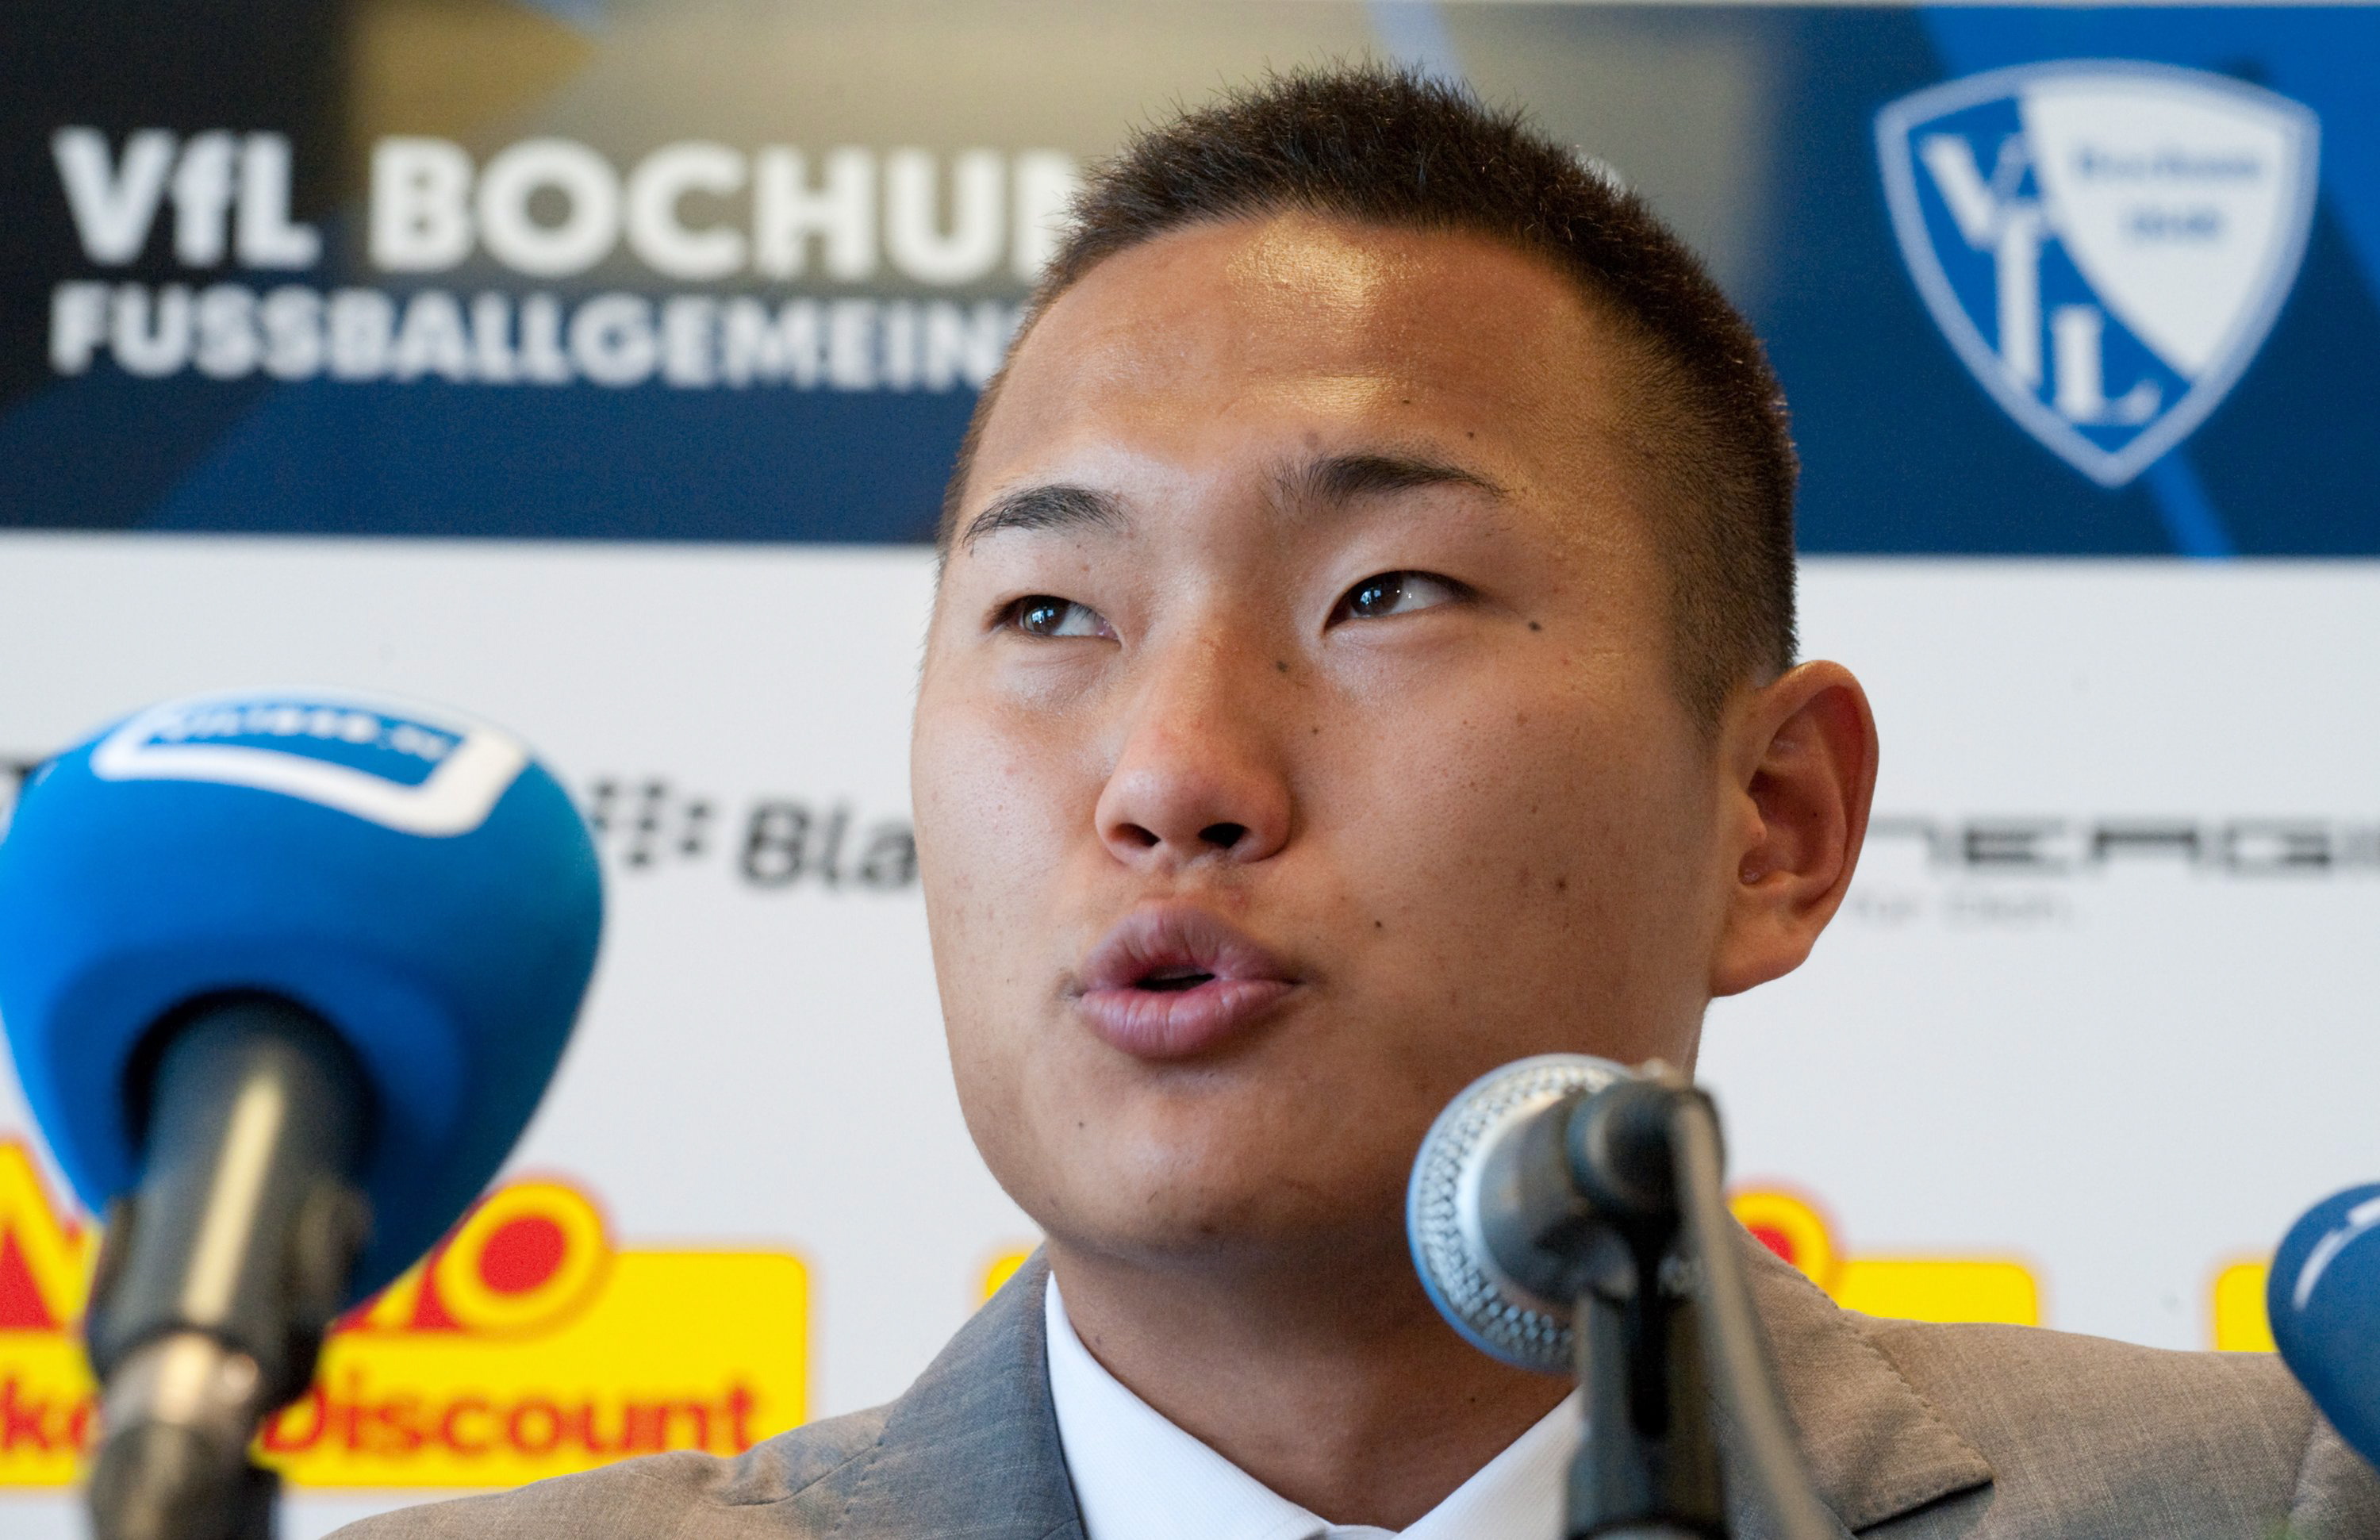 epa02254889 The newly acquired North Korean player Jong Tae-Se speaks at a news conference of the German soccer club VfL Bochum in Bochum, Germany, 20 July 2010. Jong Tae-Se is the first North Korean player joining a team of the German professional soccer league.  EPA/BERND THISSEN